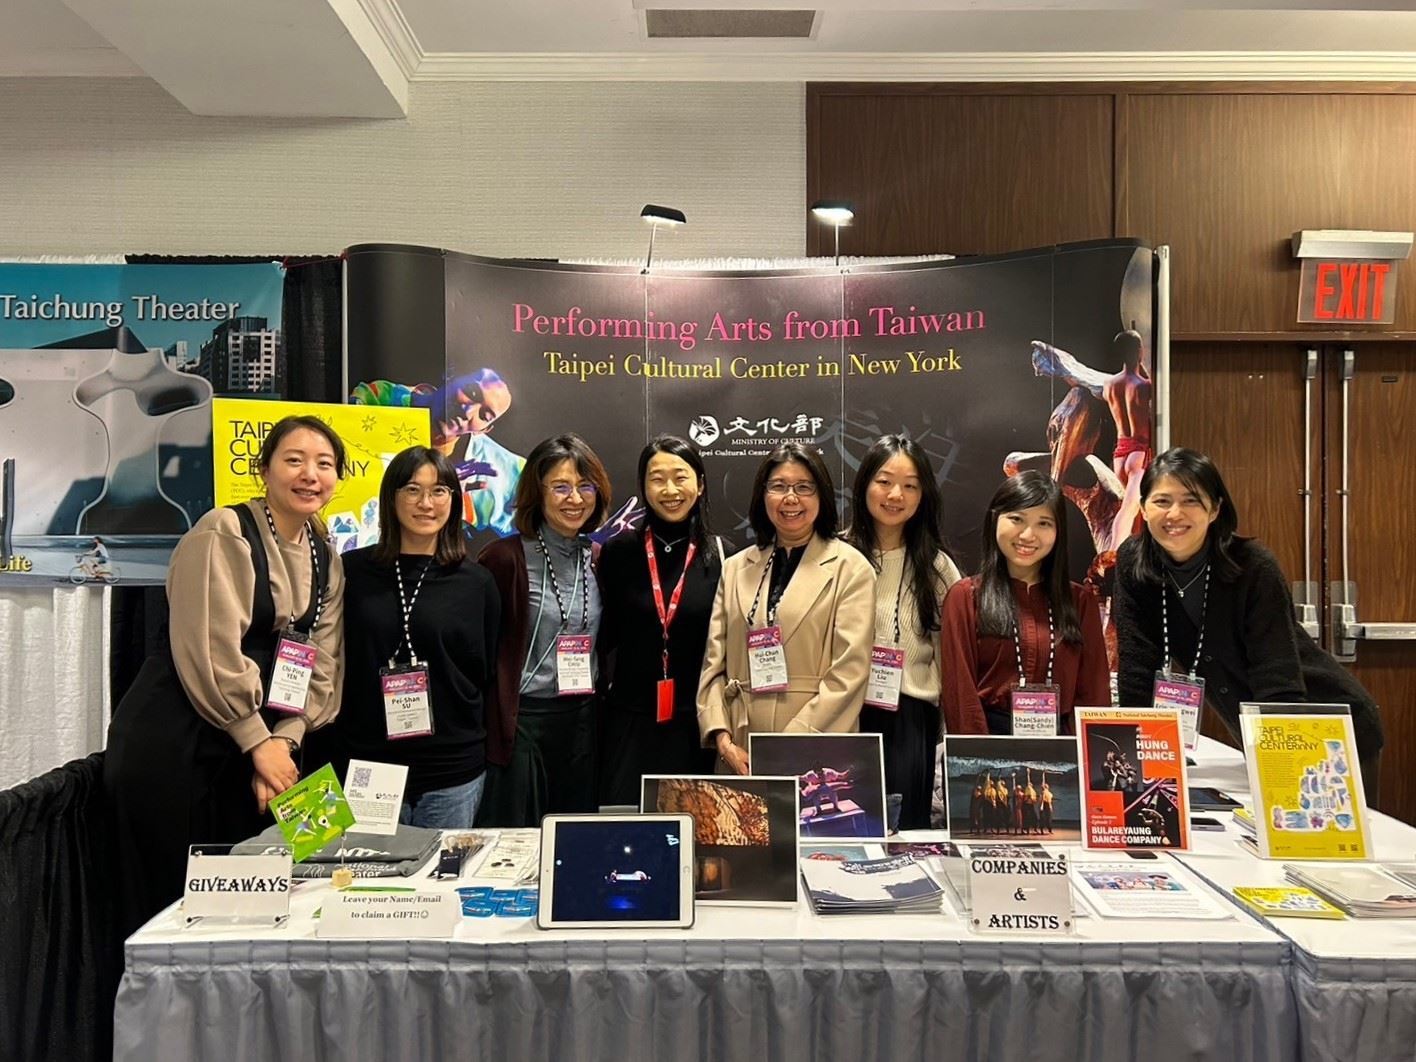 Performing arts from Taiwan highlighted at APAP conference in New York